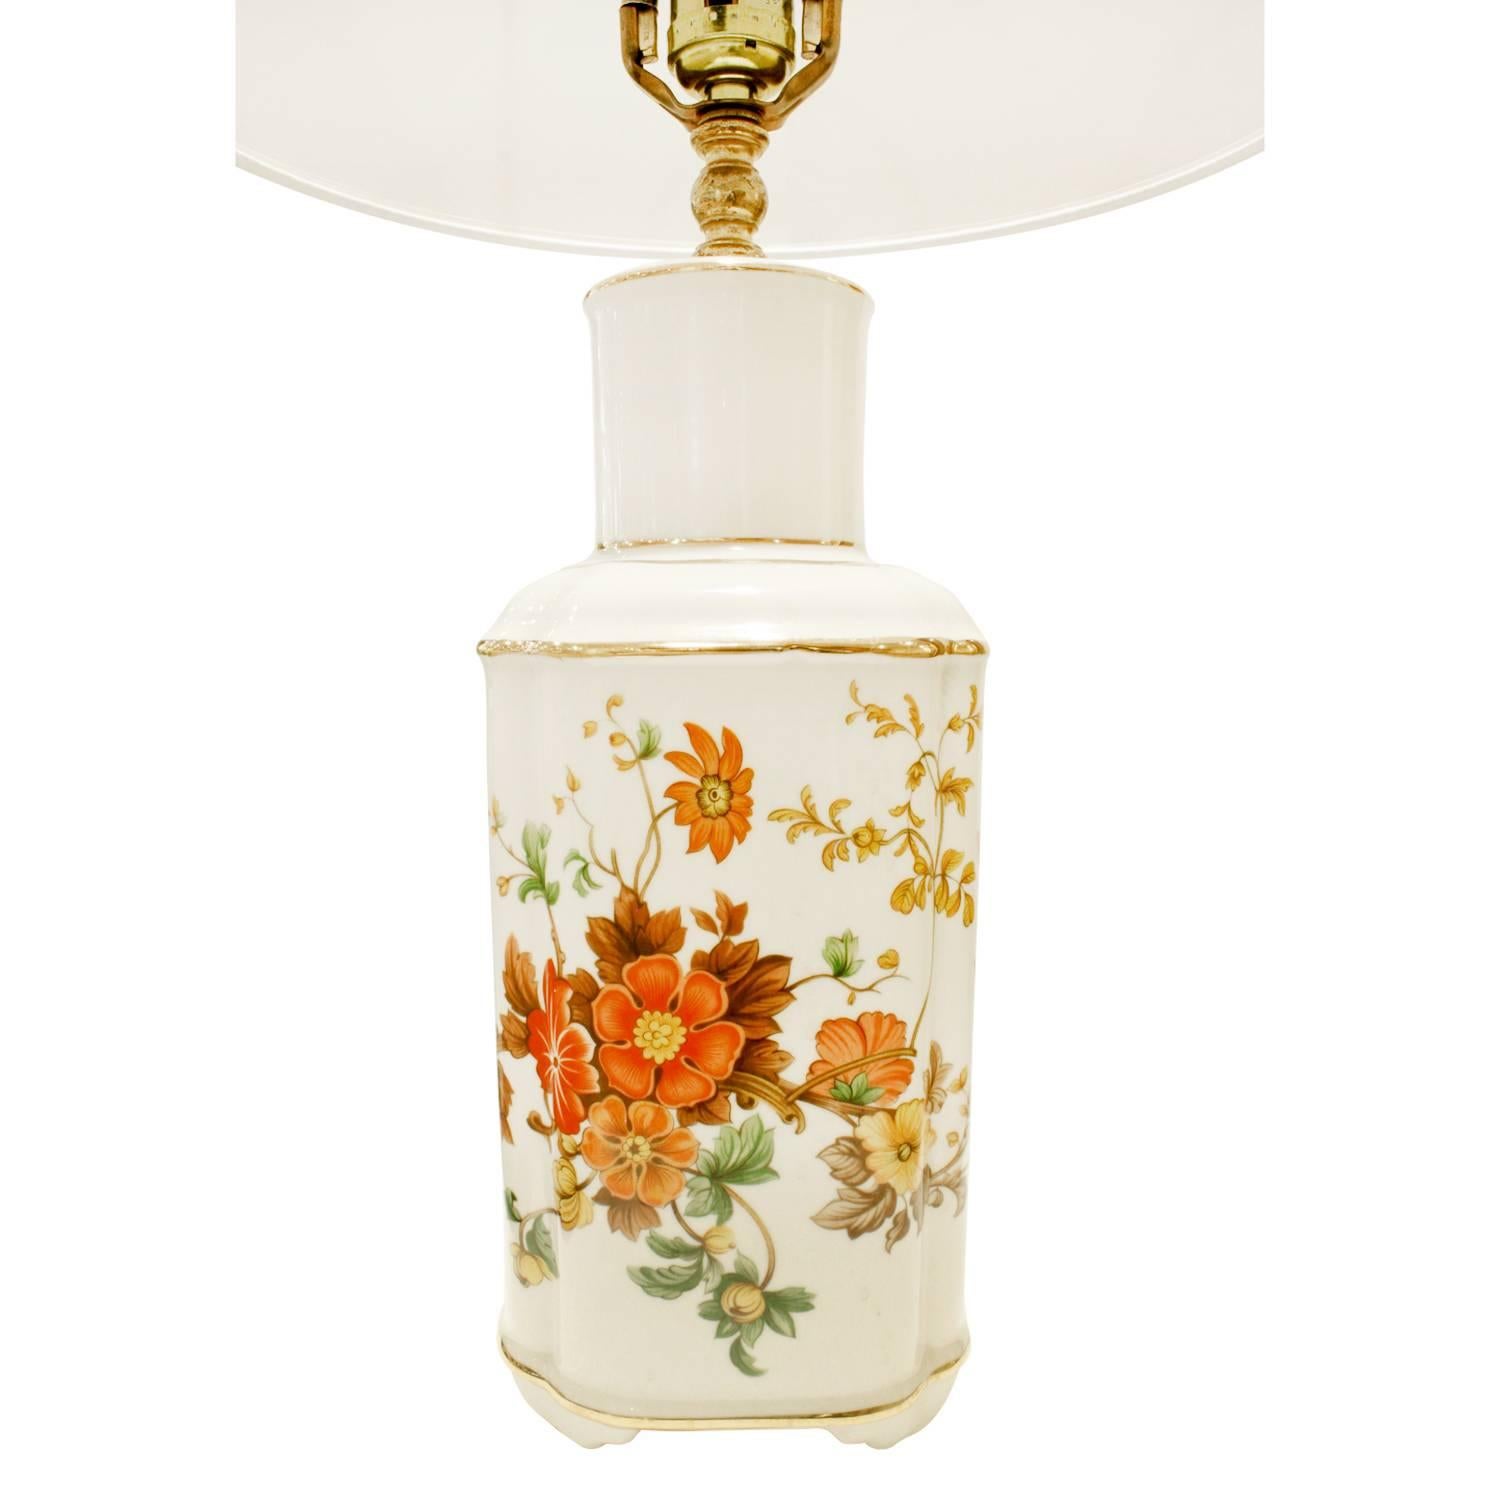 American  Studio Made Porcelain Table Lamp with Flowers, 1960s For Sale